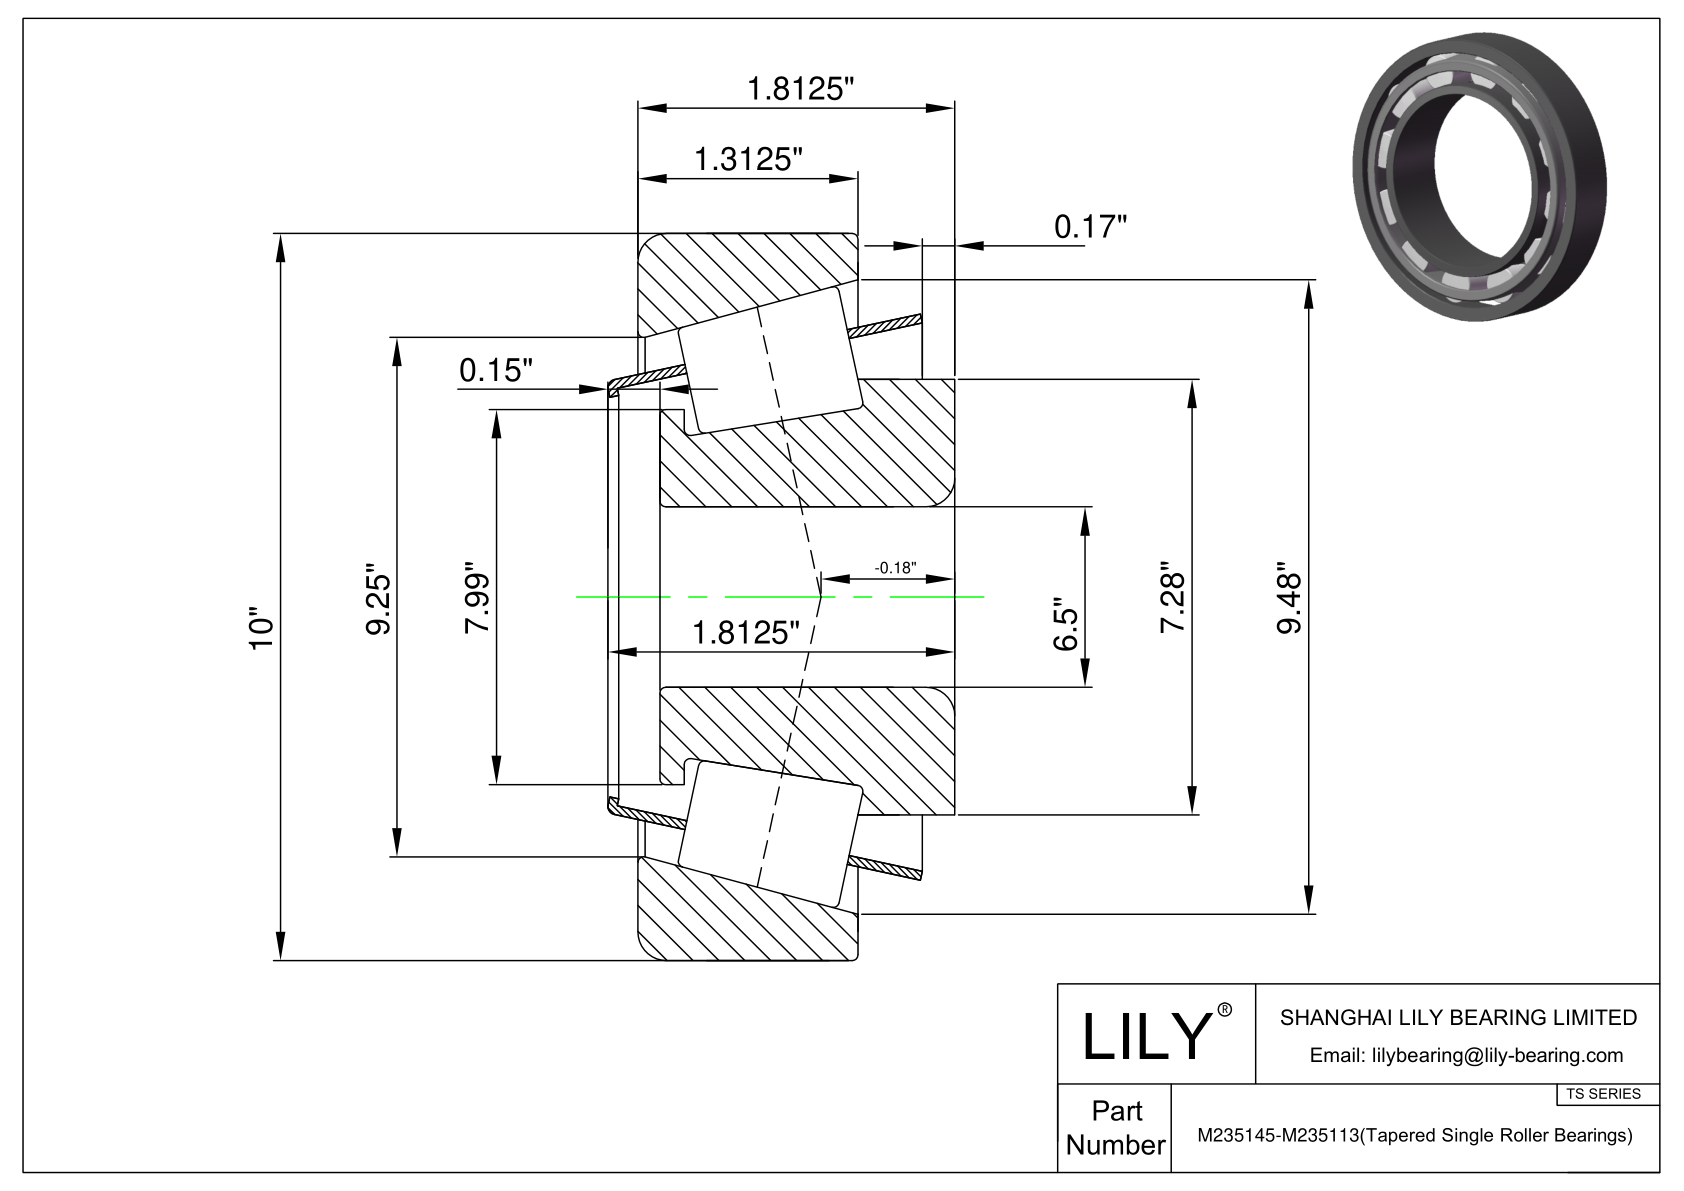 M235145-M235113 TS (Tapered Single Roller Bearings) (Imperial) cad drawing